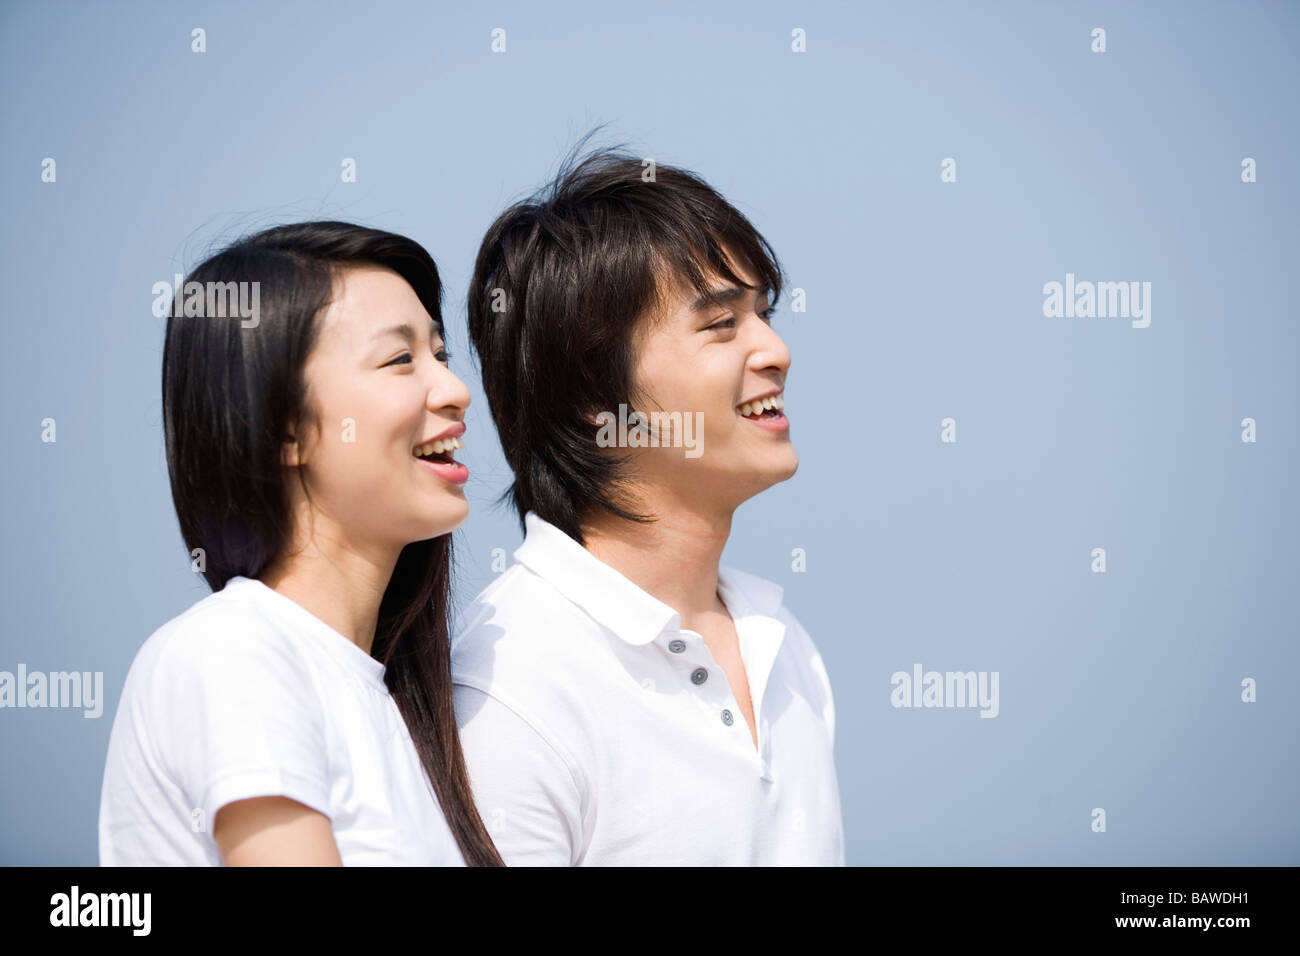 Young couple toothy smiling side view Stock Photo